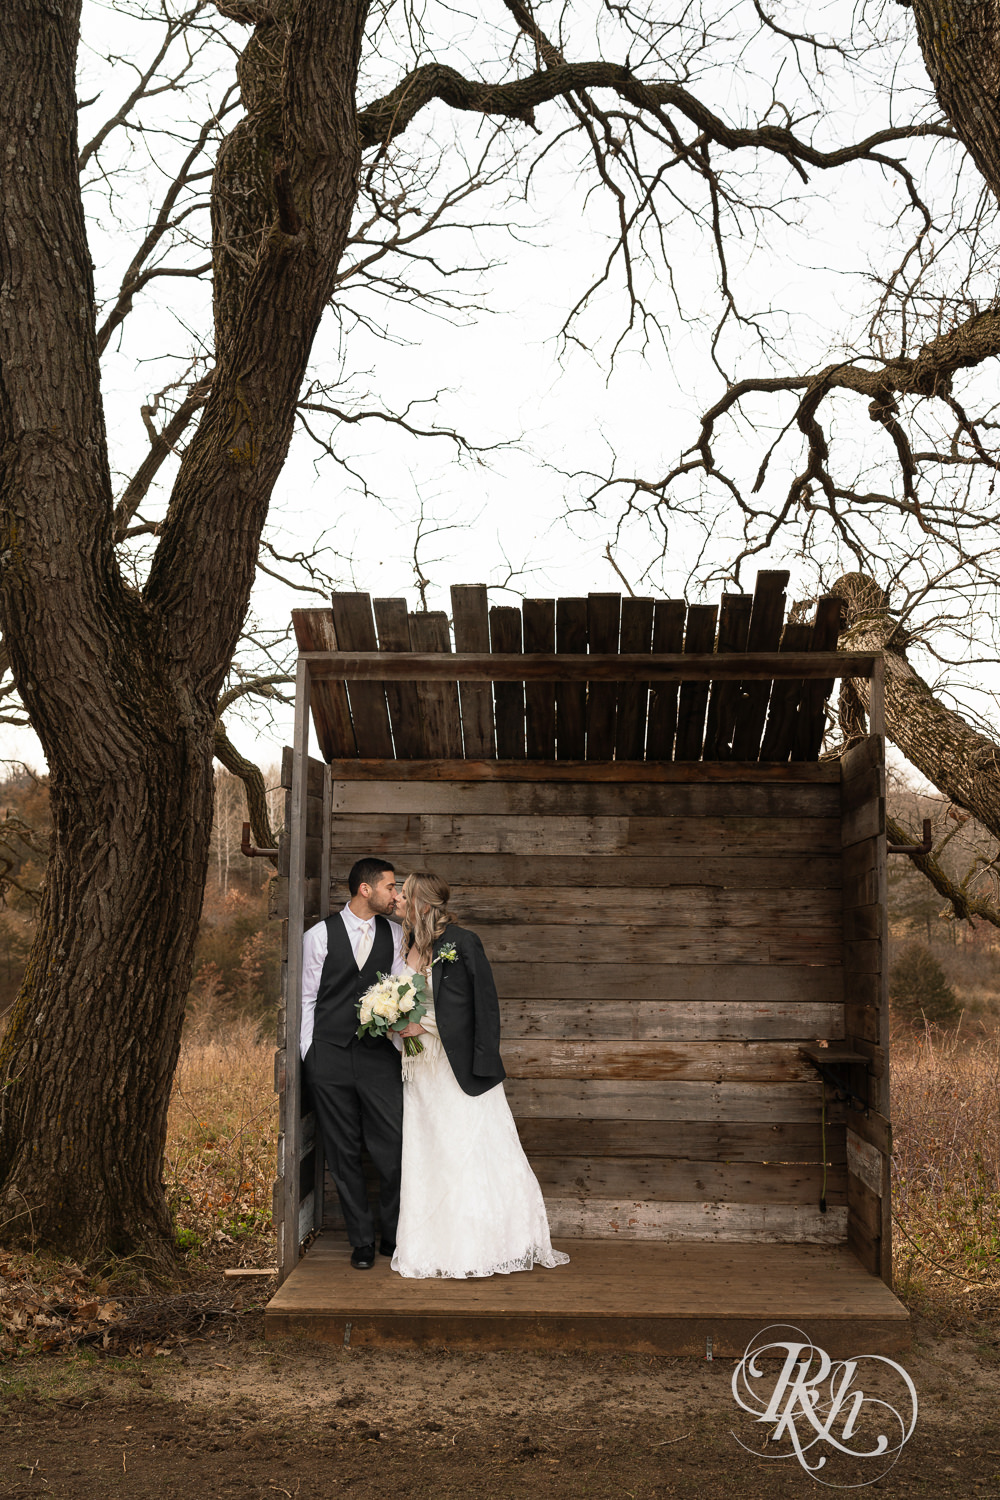 Bride and groom kiss in the woods on wedding day at Almquist Farm in Hastings, Minnesota.